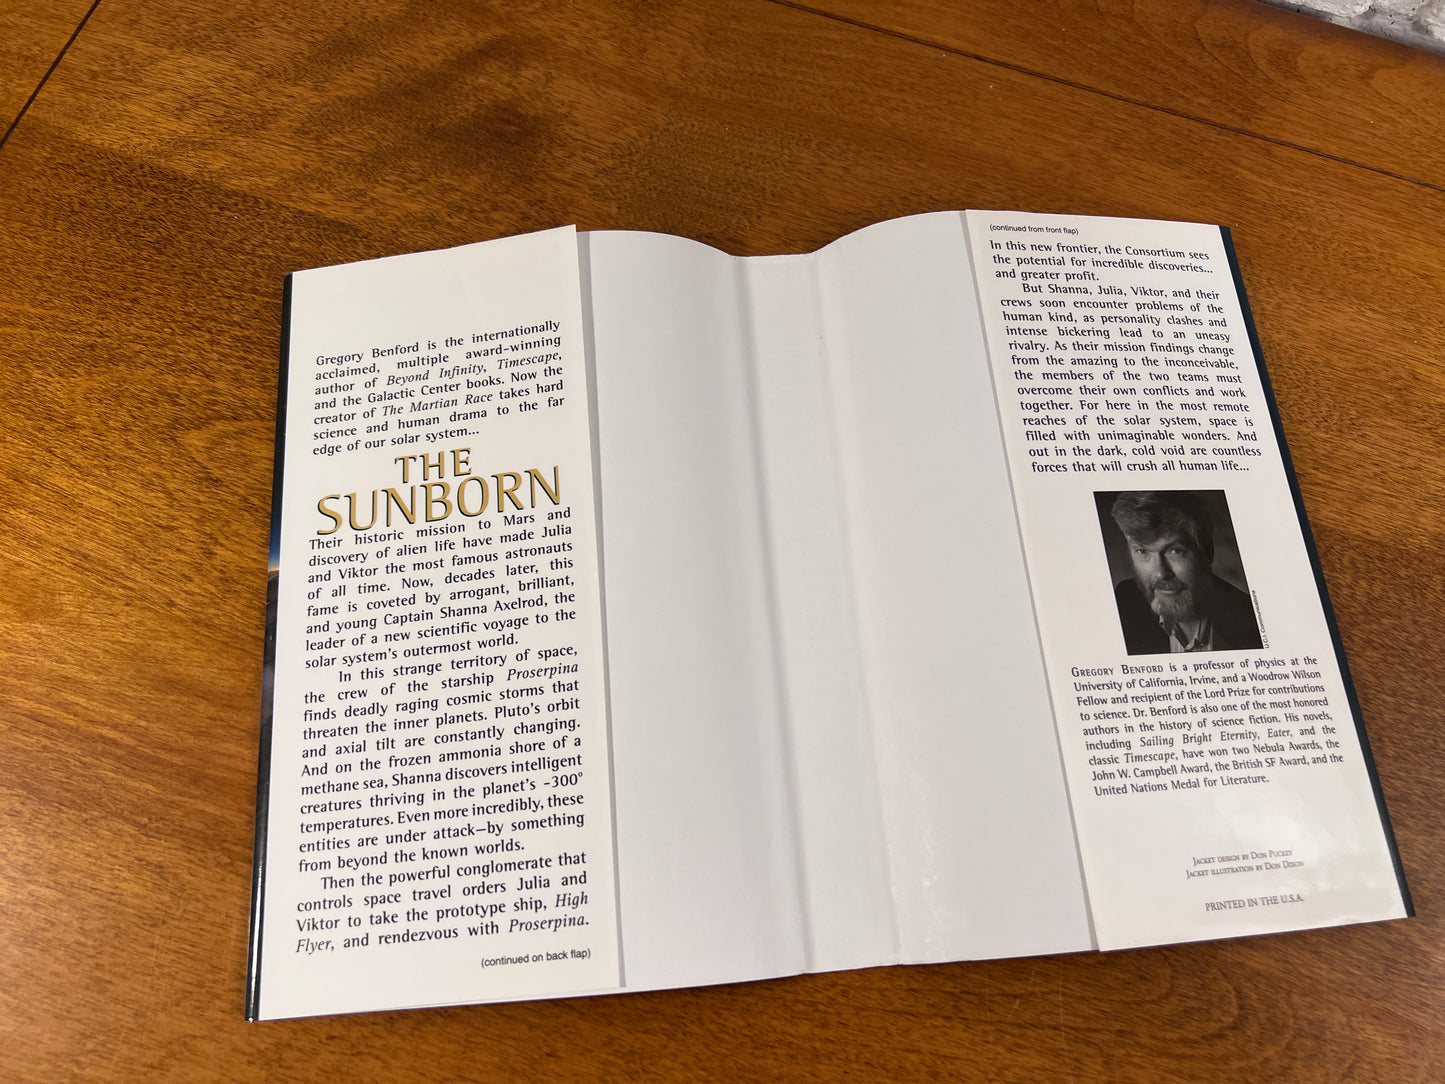 The Sunborn by Gregory Benford